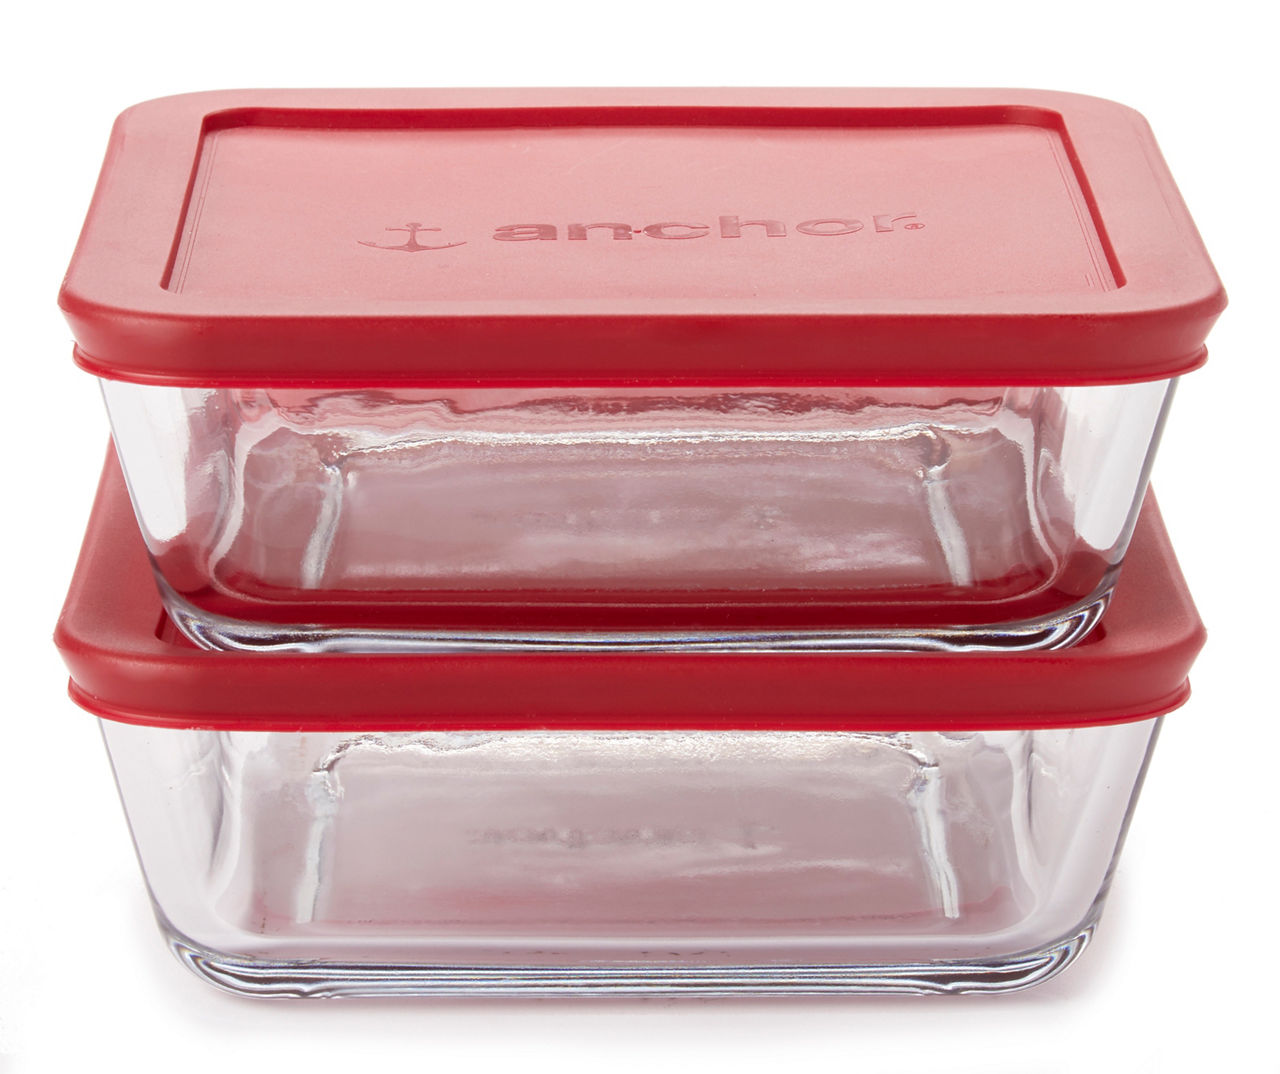 Pyrex Glass Meal Prep Boxes & Food Storage Containers ONLY $9.99